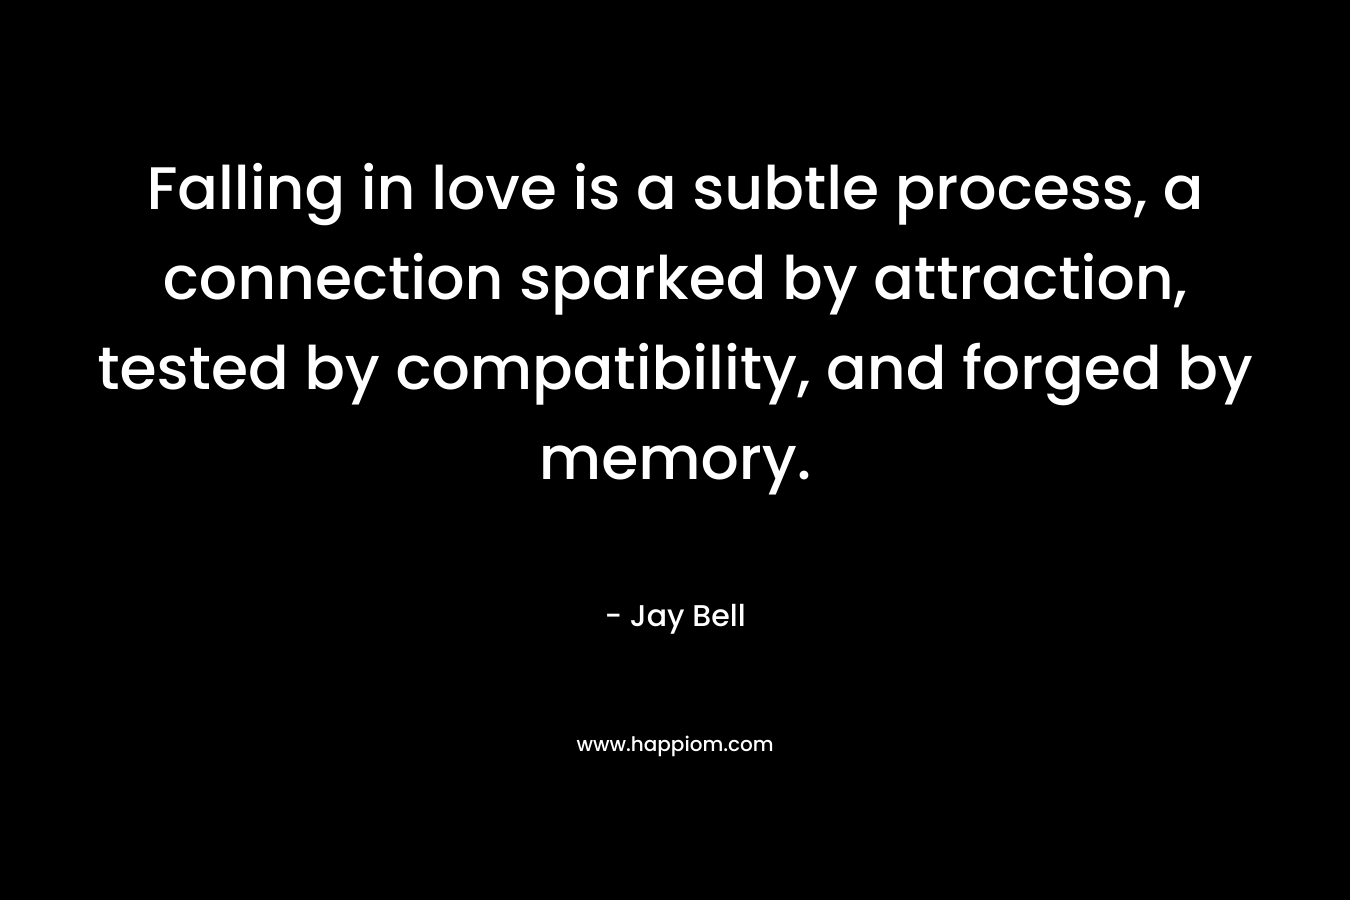 Falling in love is a subtle process, a connection sparked by attraction, tested by compatibility, and forged by memory. – Jay Bell